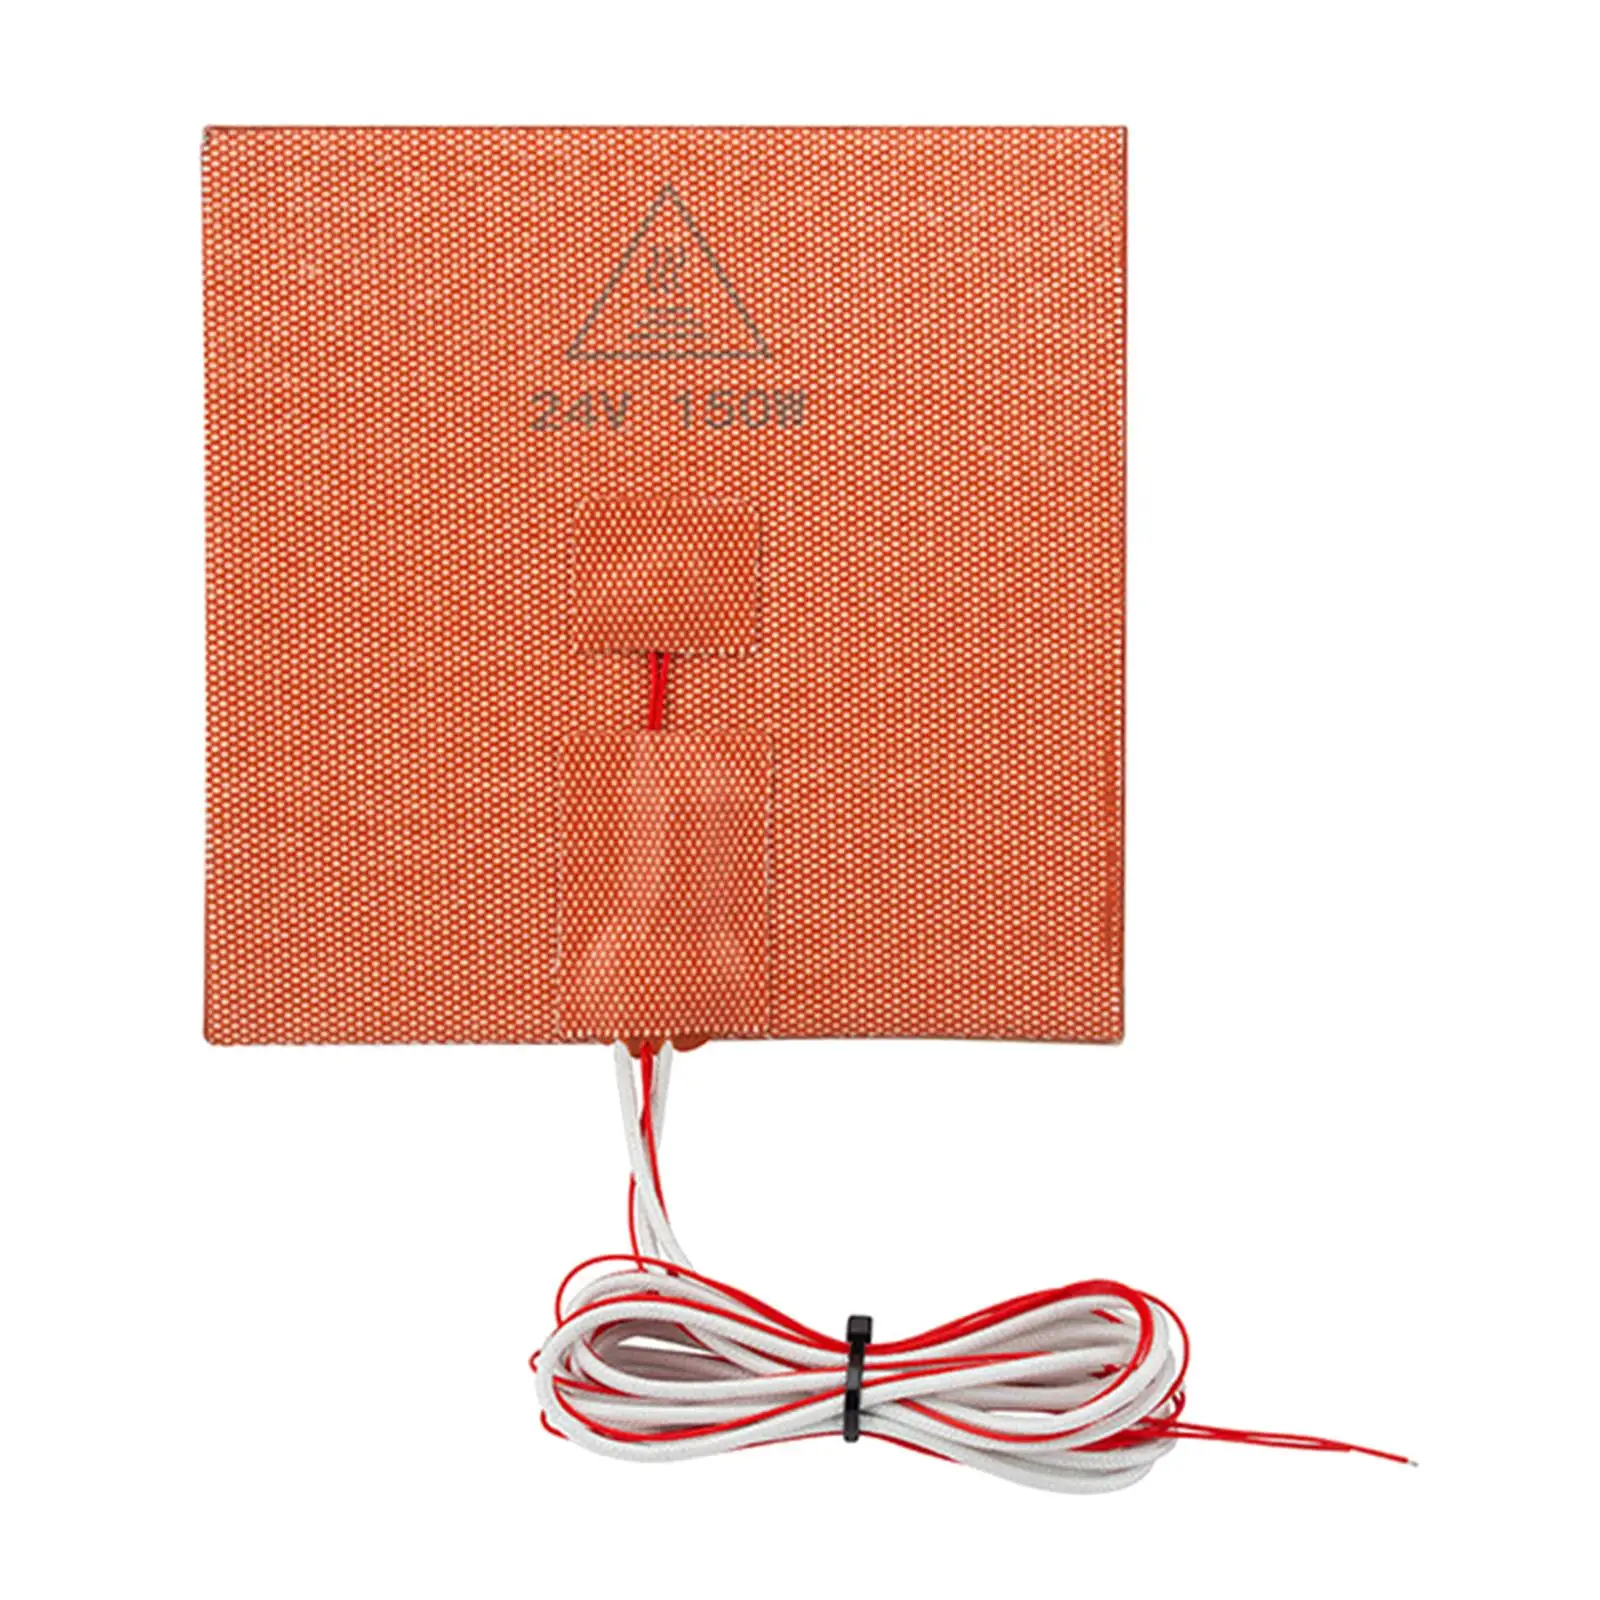 Silicone Heater Pad for 3D Printers 24V/150W Heated Bed DIY Heating Pad 150 * 150mm with 3M Adhesive 3D Printer Tools